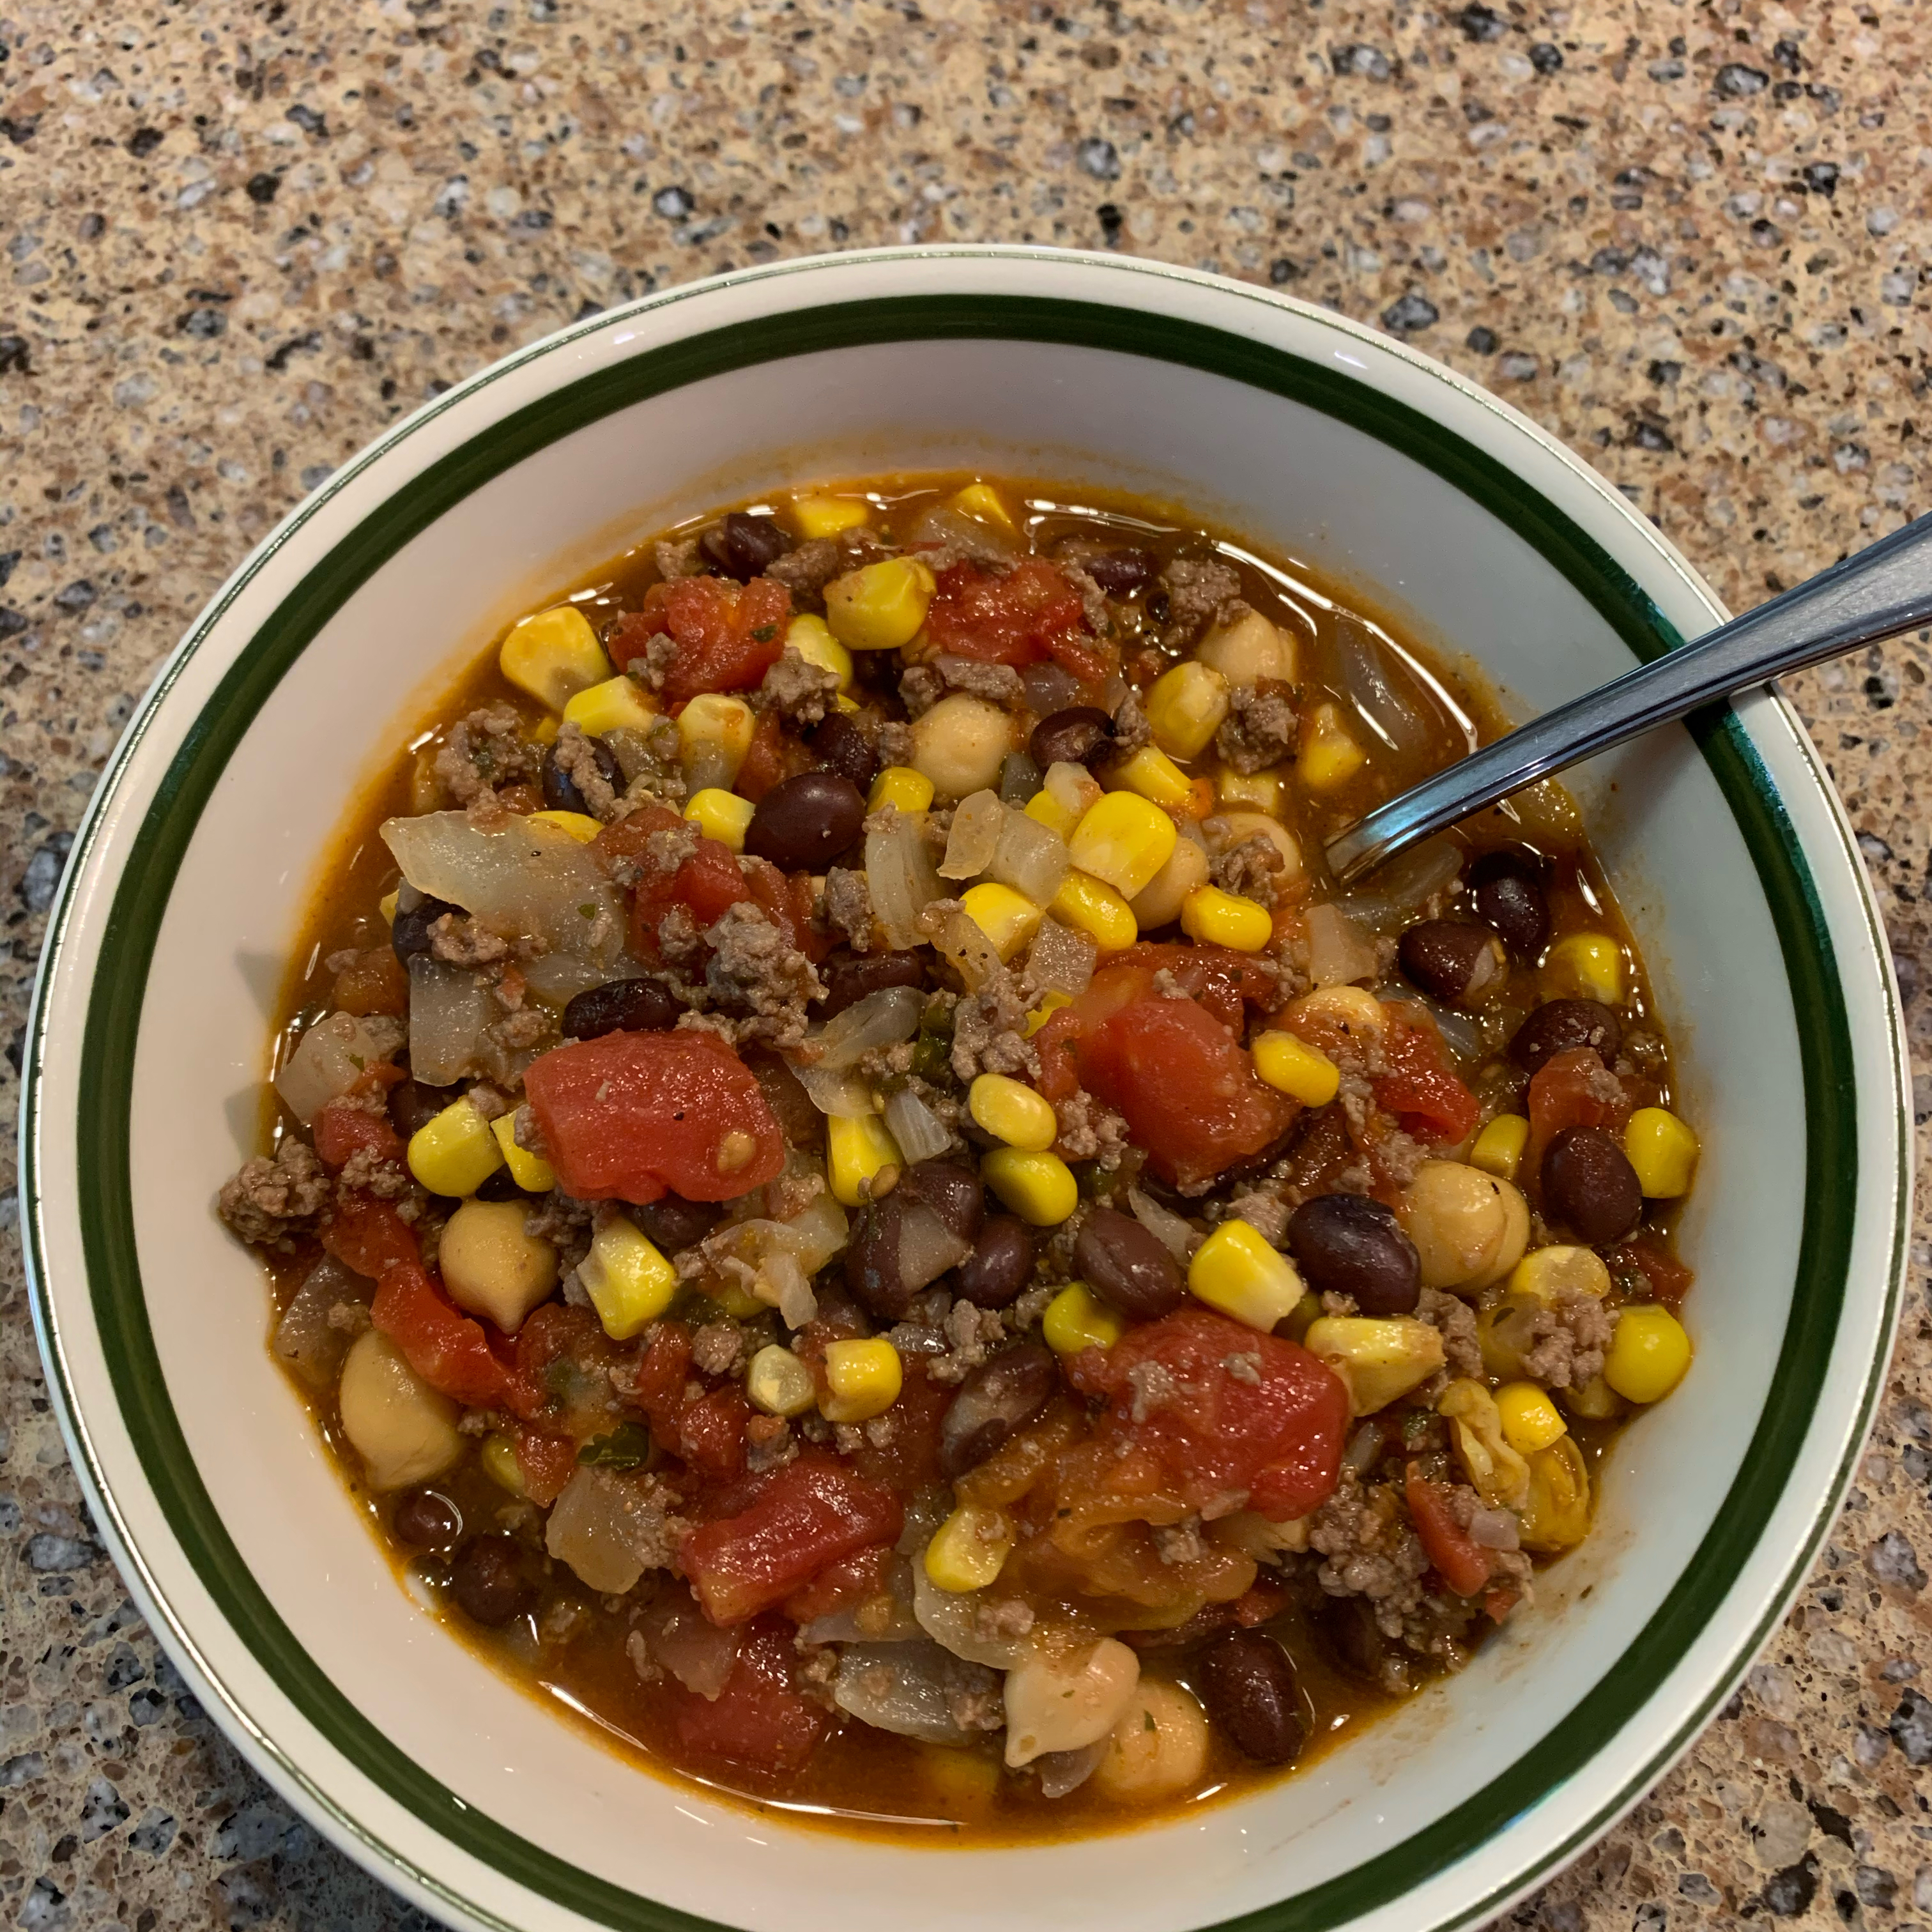 <p>Stock up the pantry for this super-quick soup, featuring browned ground beef, crushed tomatoes, pinto beans, corn, black beans, diced tomatoes and green chiles, black olives, seasoned with ranch dressing mix and taco seasoning. "This thick and hearty taco soup comes together in a flash," says Soup Loving Nicole. "The subtle hint of ranch sets it apart from your average taco soup. Garnish with chopped cilantro if desired."</p>
                          